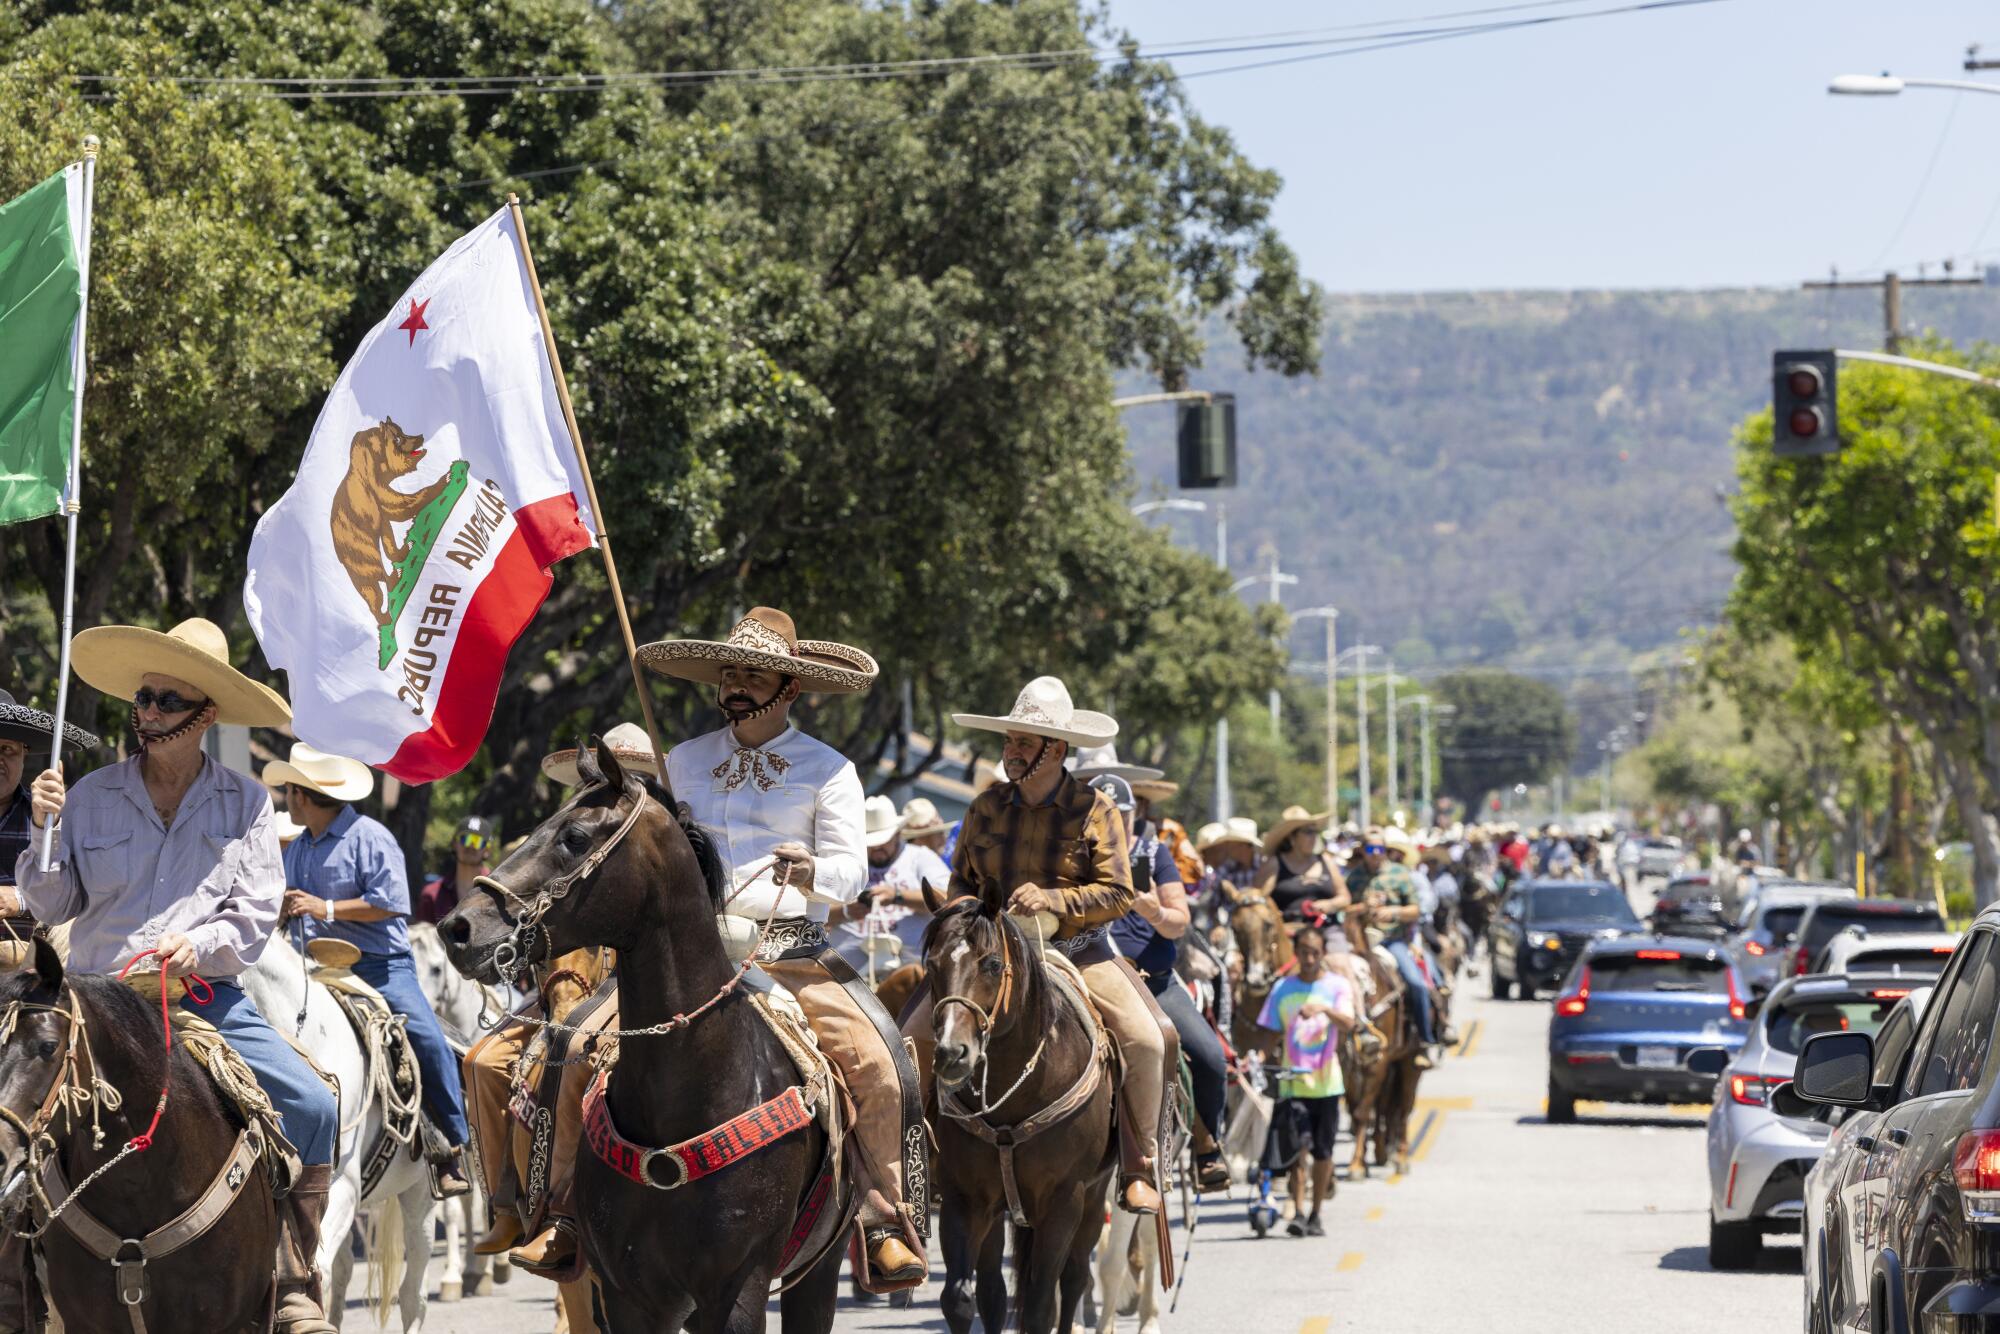 Participants of the Gran Cabalgata, marching on the streets of Whittier as they head towards South El Monte 